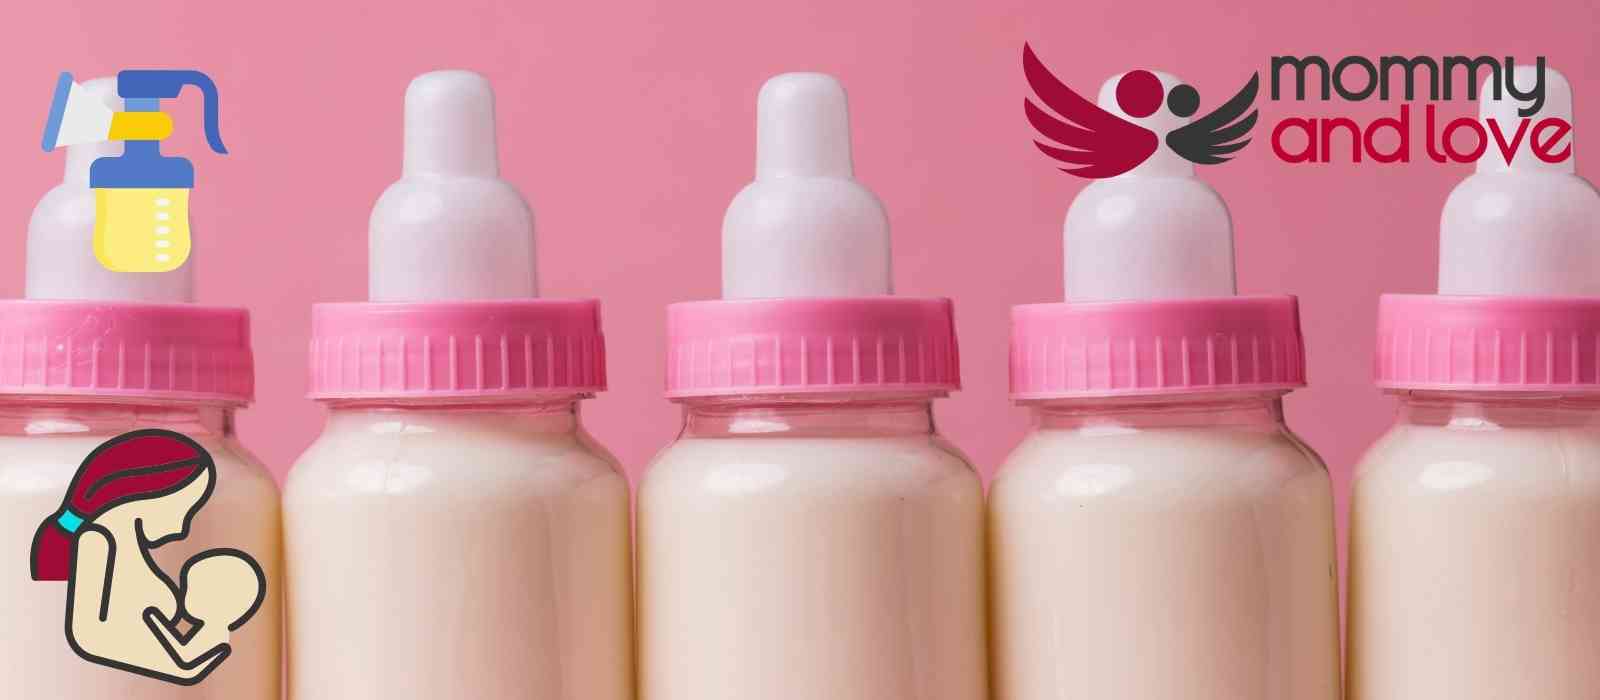 Breast milk is often called liquid gold because of its many benefits for both mothers and infants. It is packed with nutrients that are essential for growth and development, and it also contains antibodies that help protect against infection.